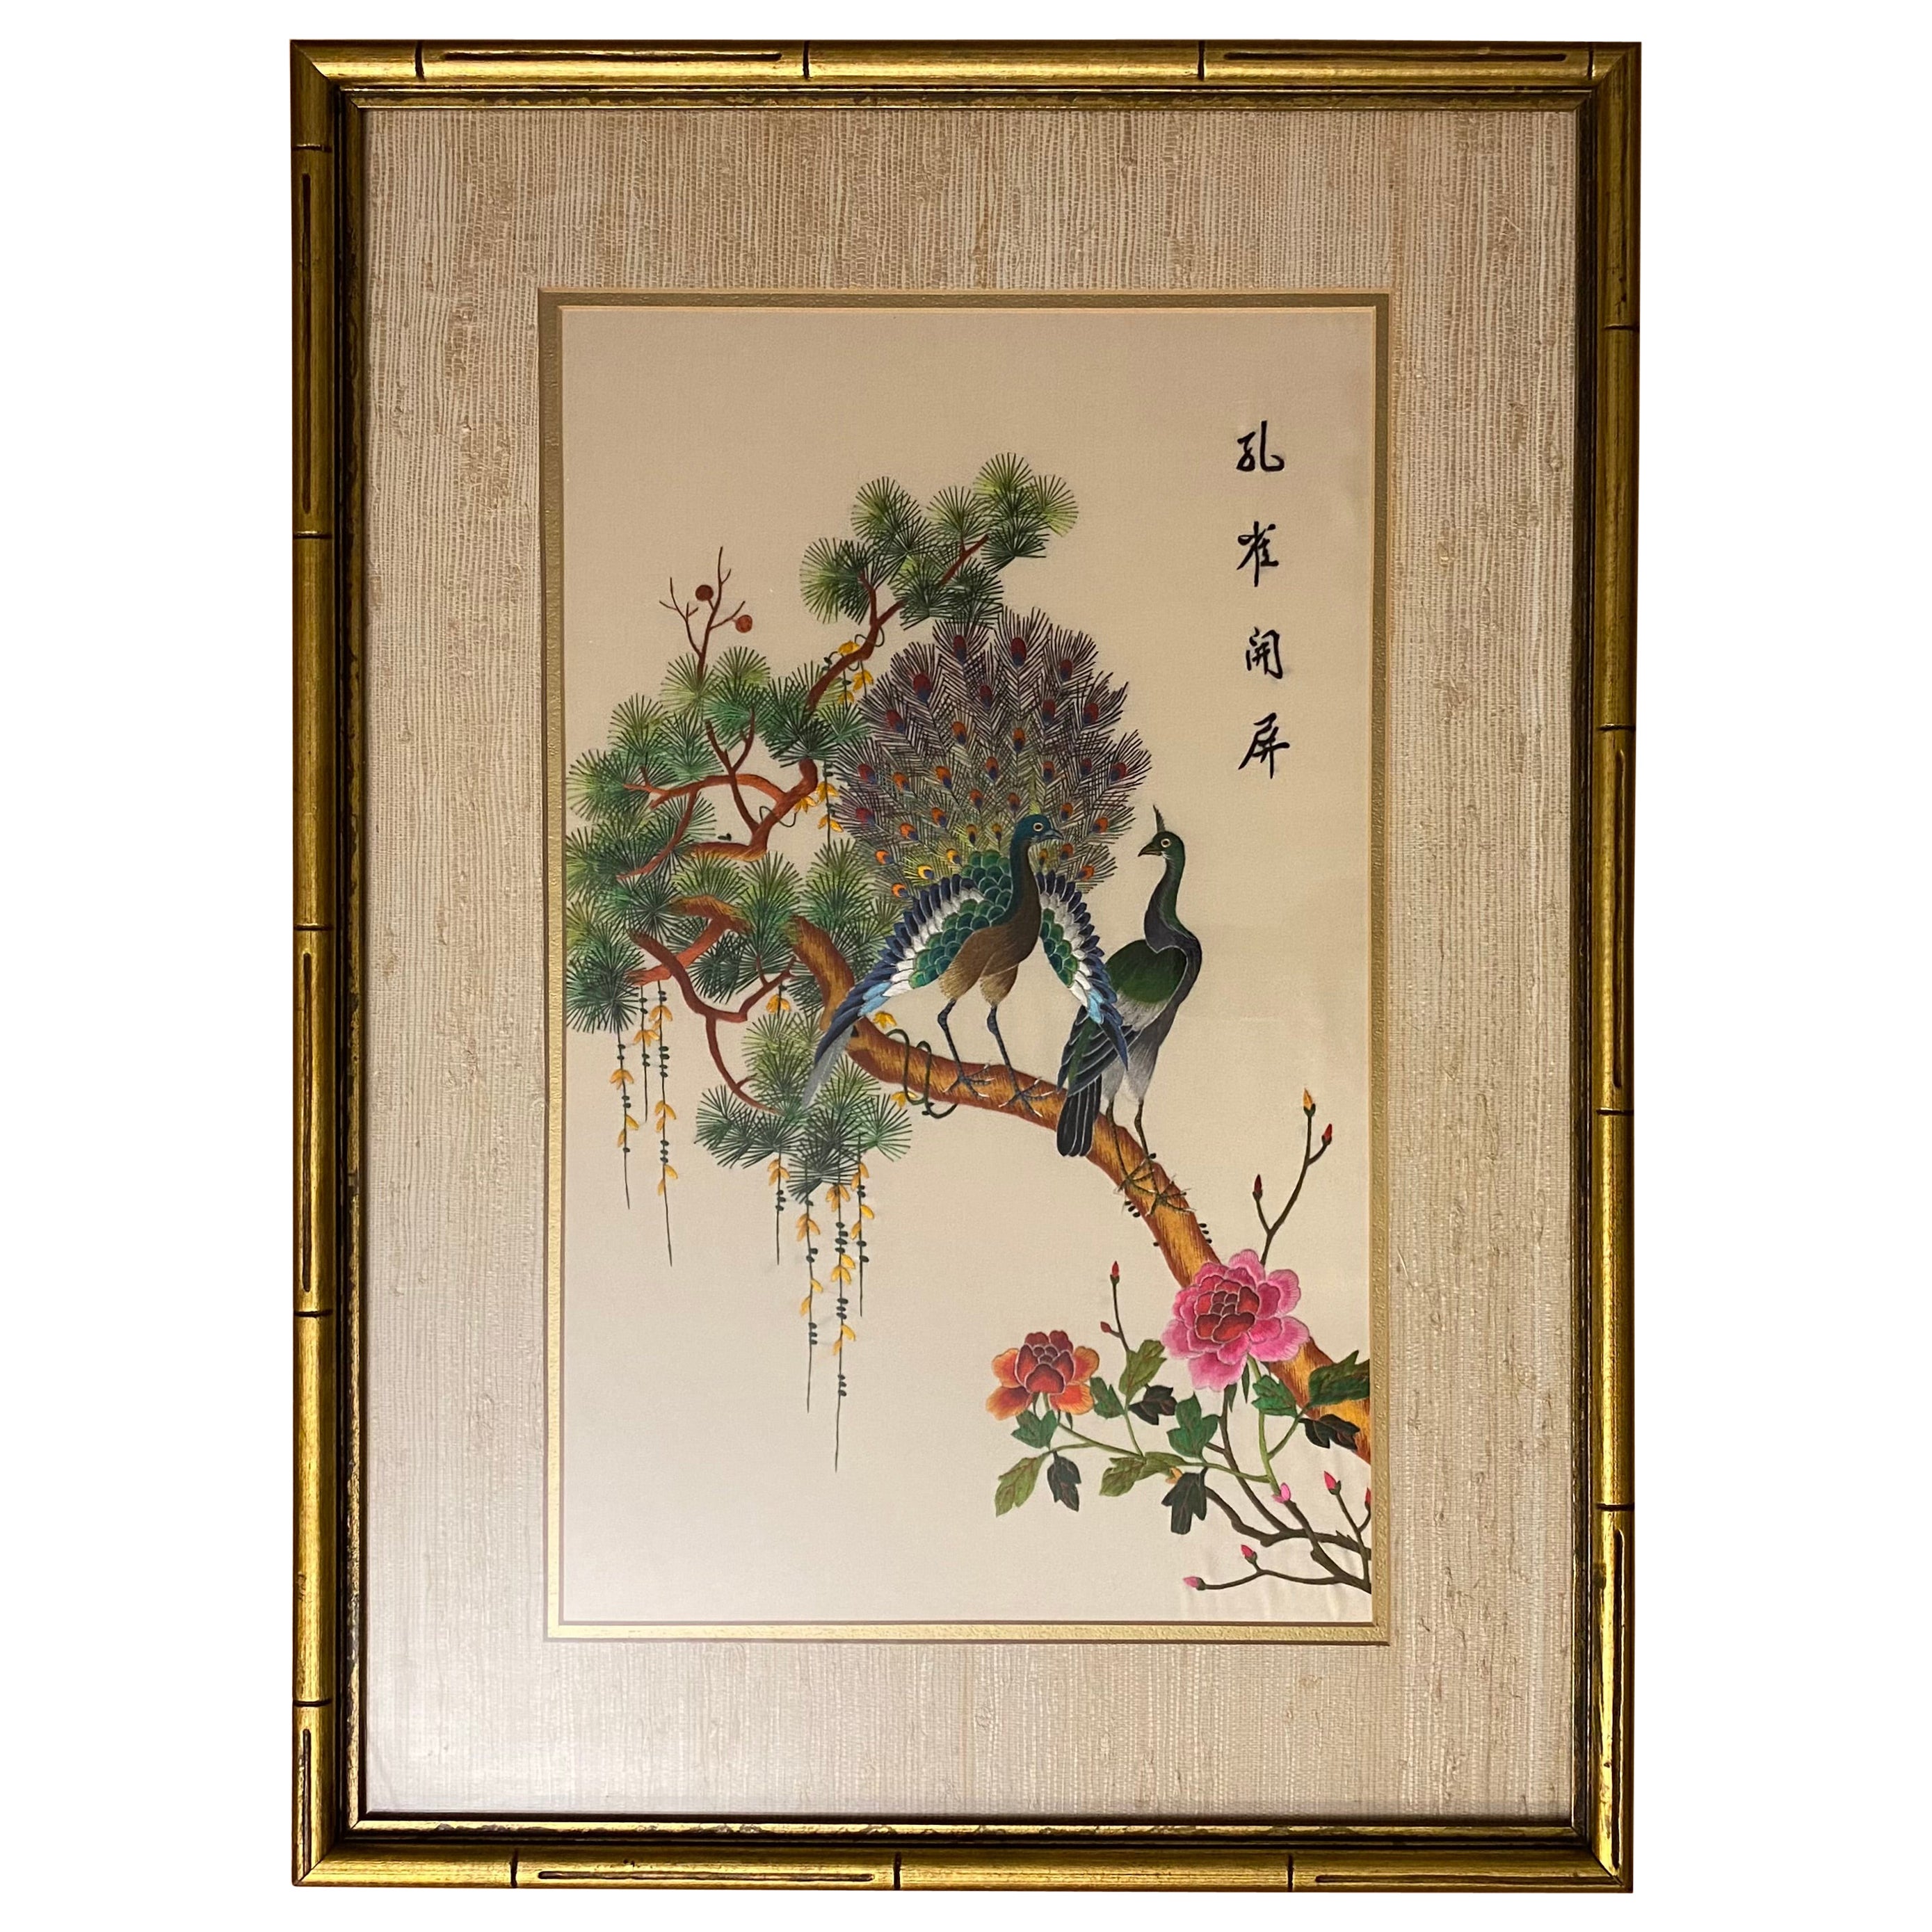 Vintage Silk Thread Wall Art Flora and Fauna Painting Featuring Peacocks For Sale